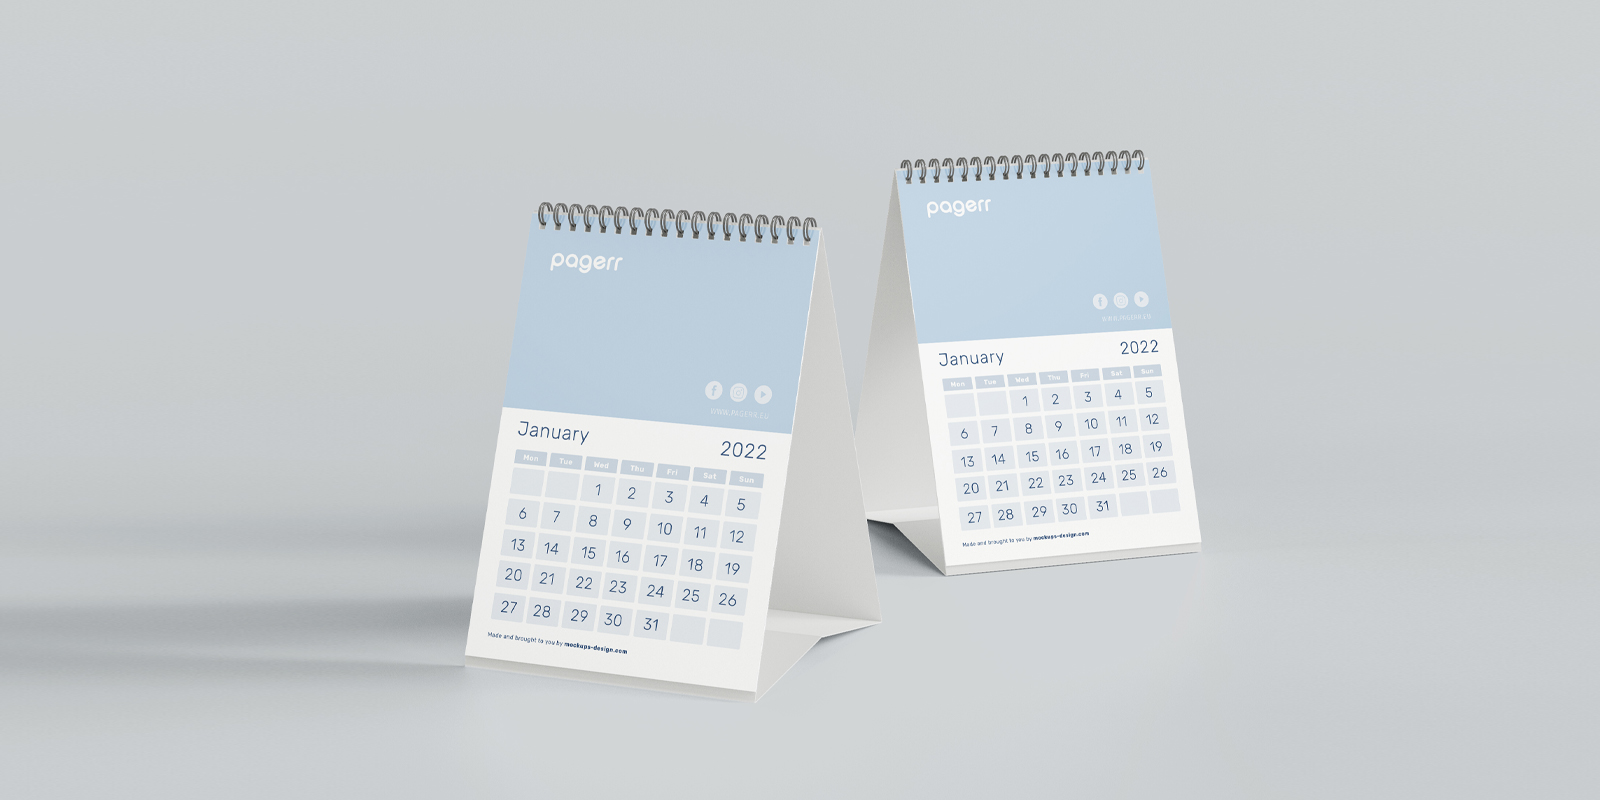 Desk calendars in Vilnius - Print with Pagerr